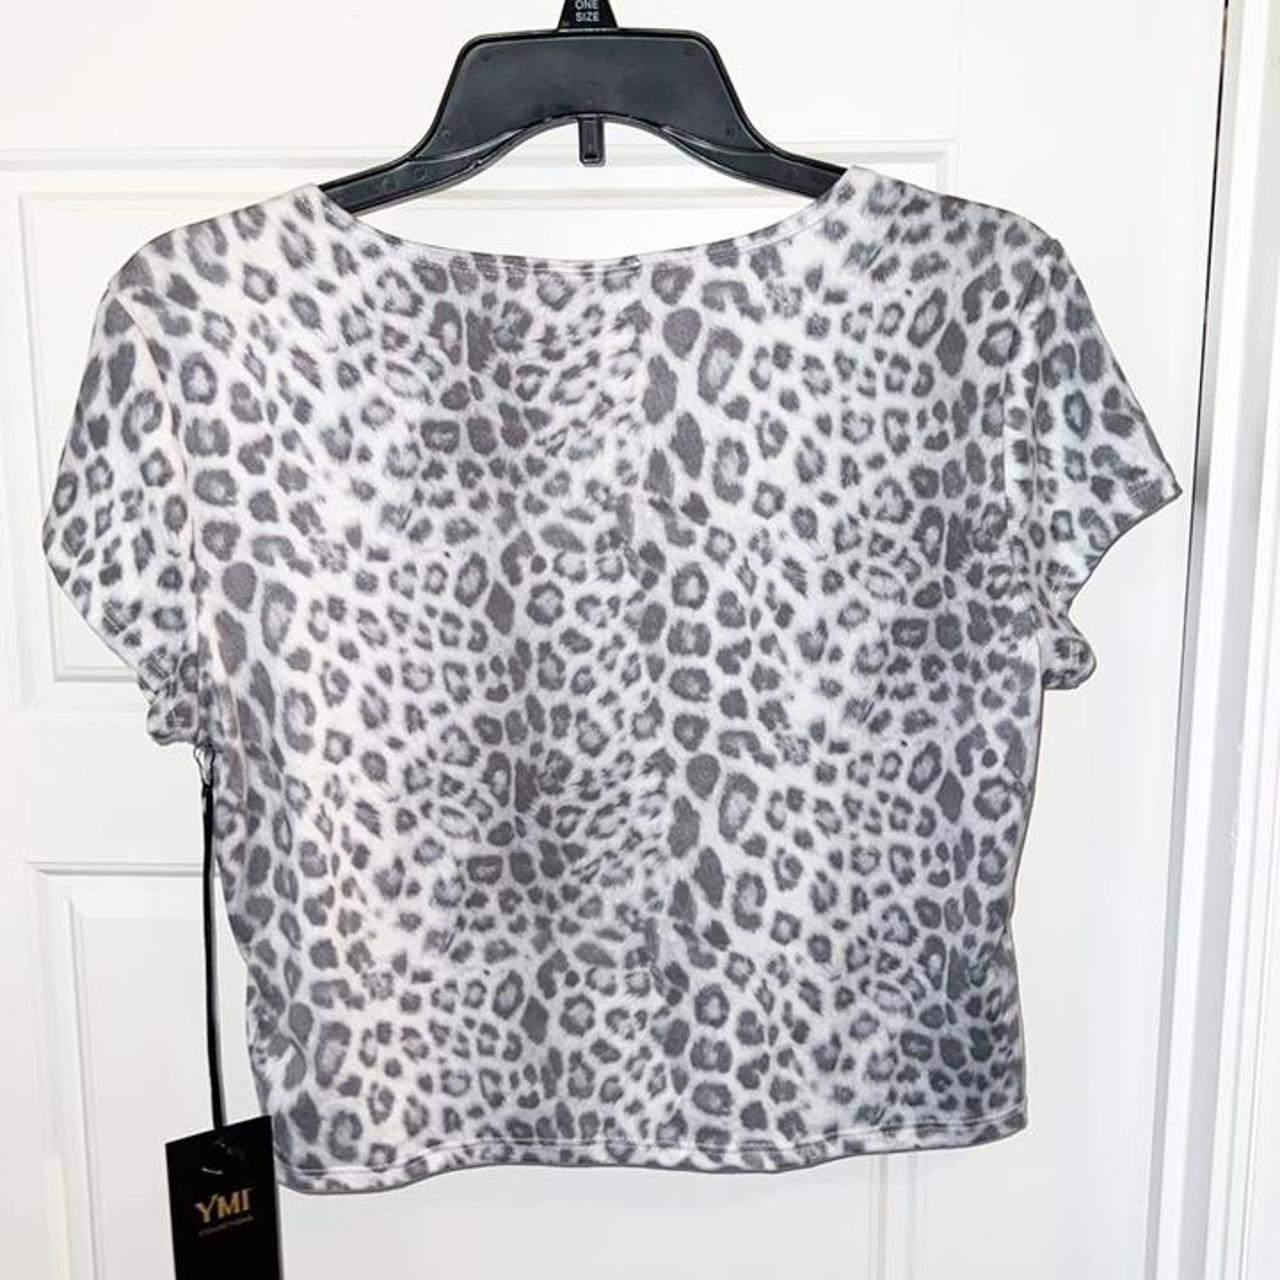 Product Image 3 - YMI Leopard Crop Top Size